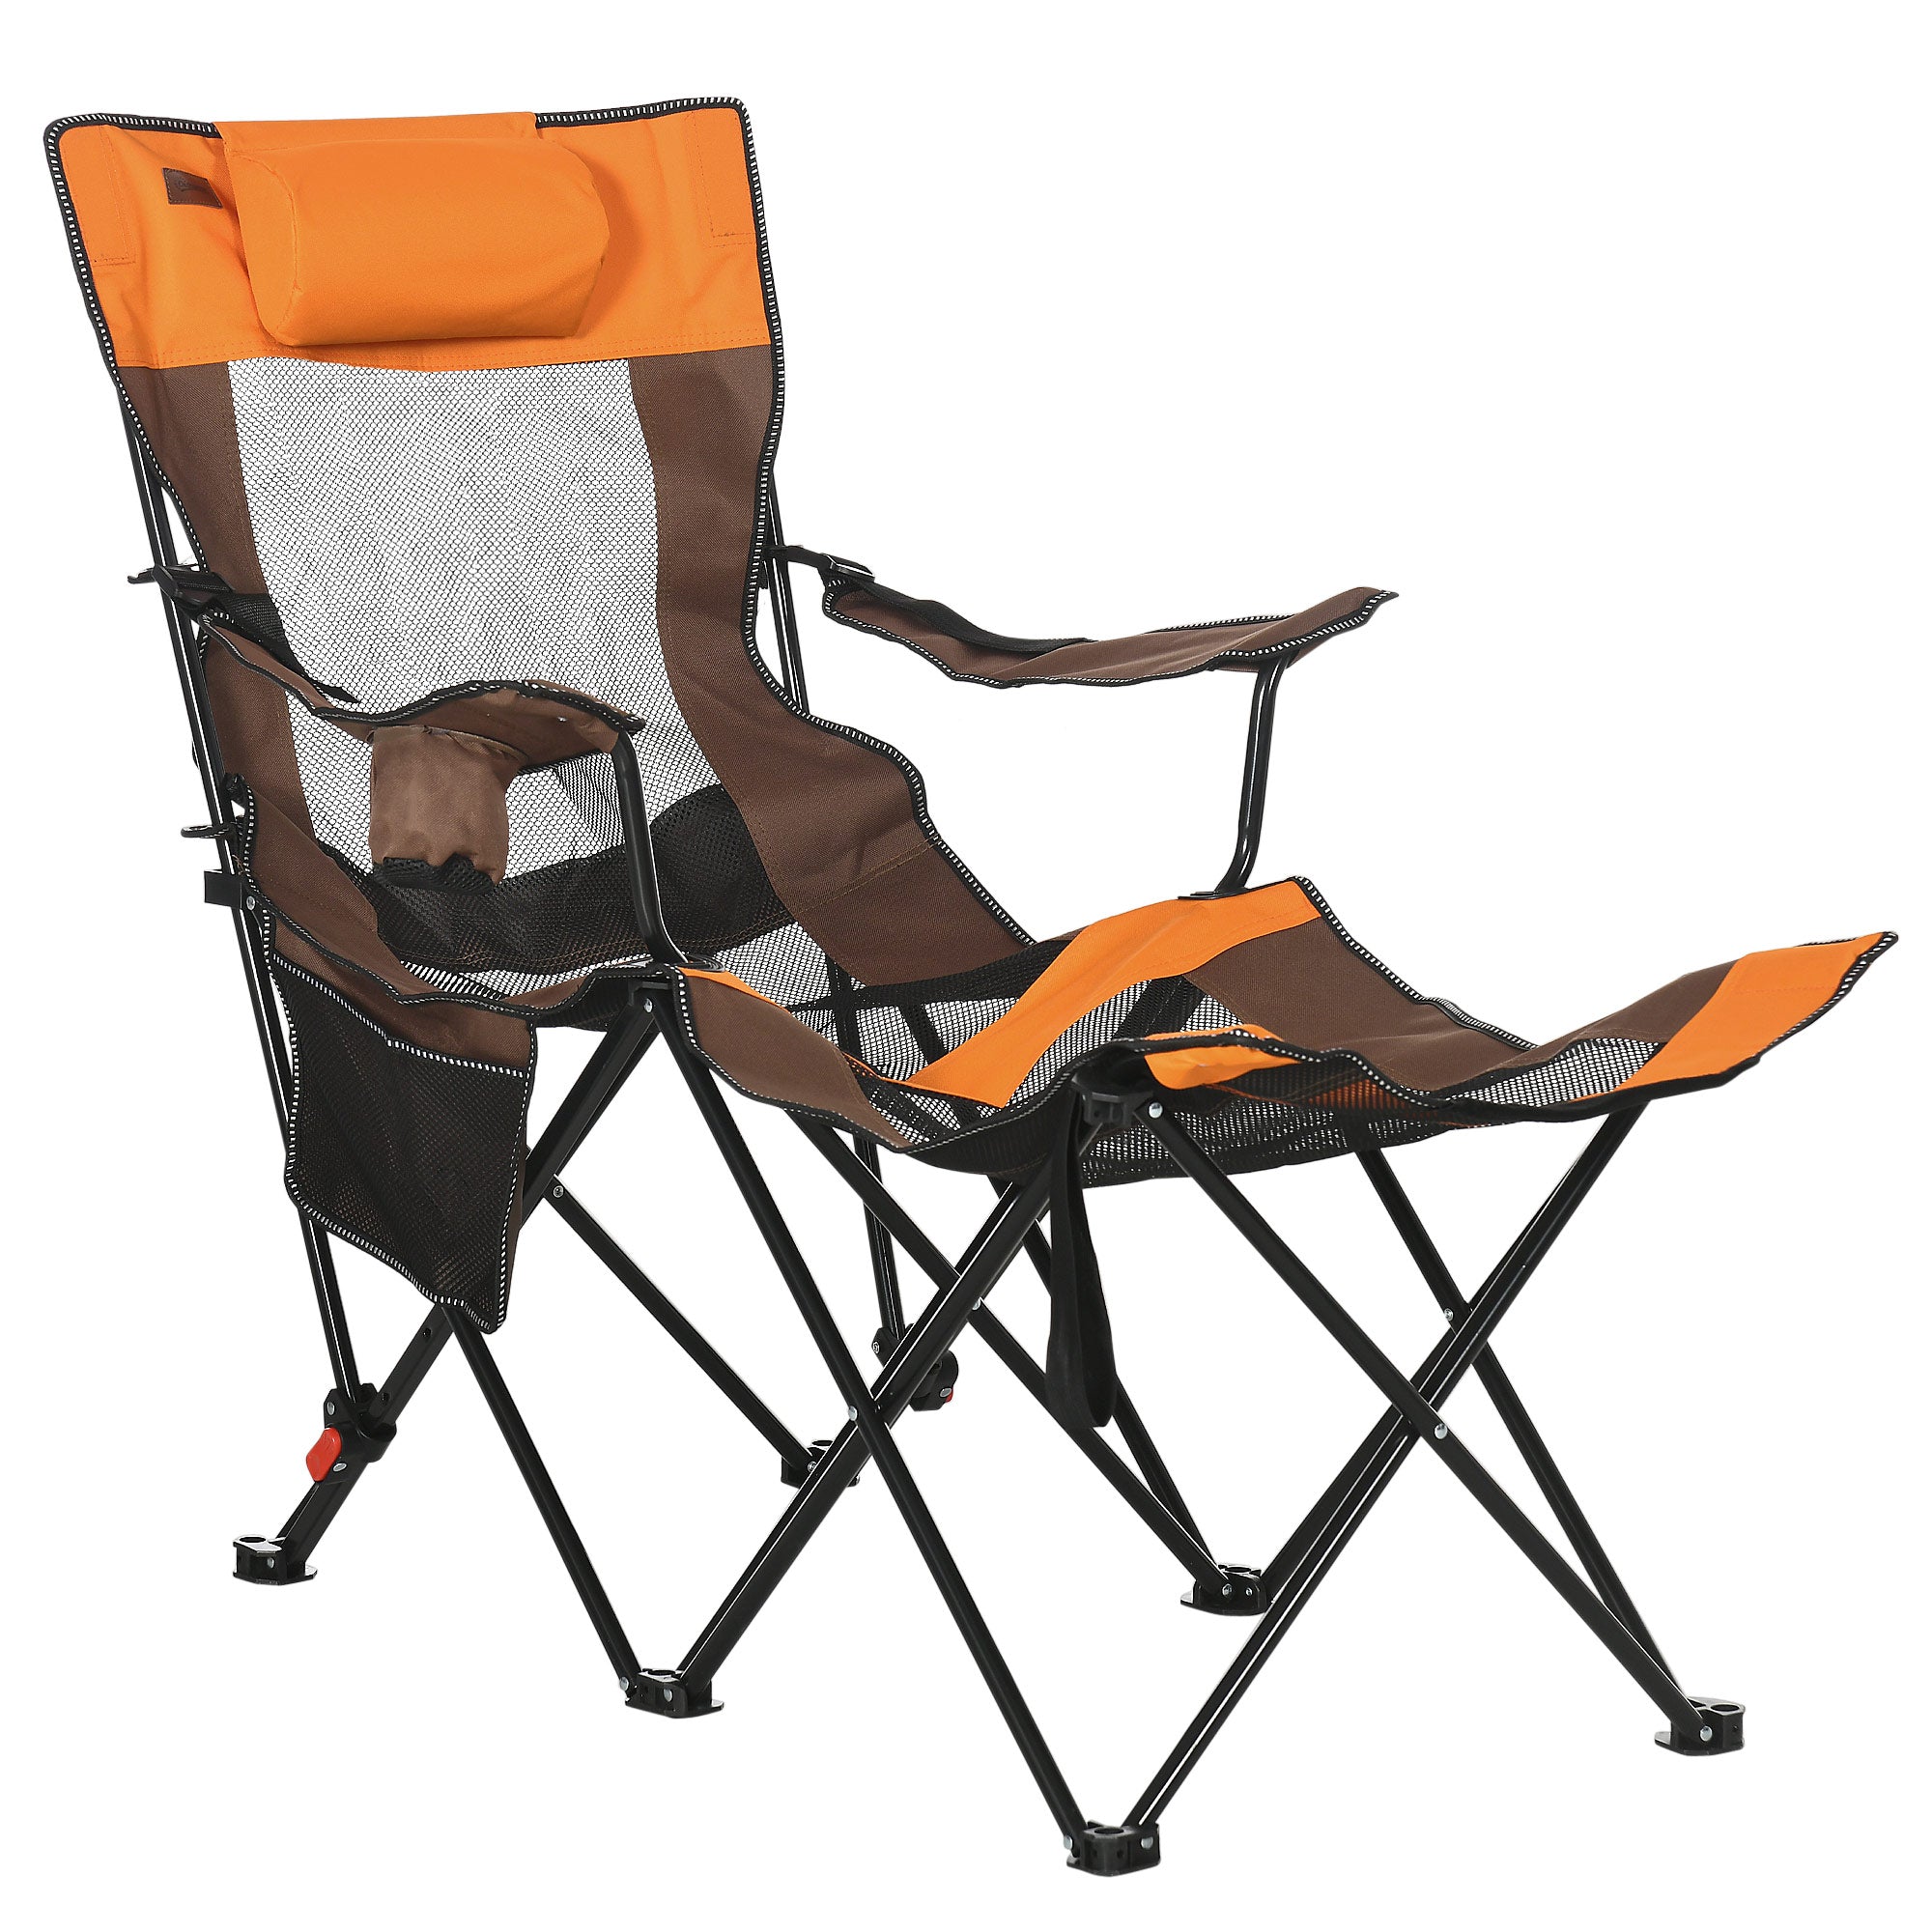 Outsunny Foldable Camping Chair w/ Footrest - Adjustable Backrest - Bag - Coffee  | TJ Hughes